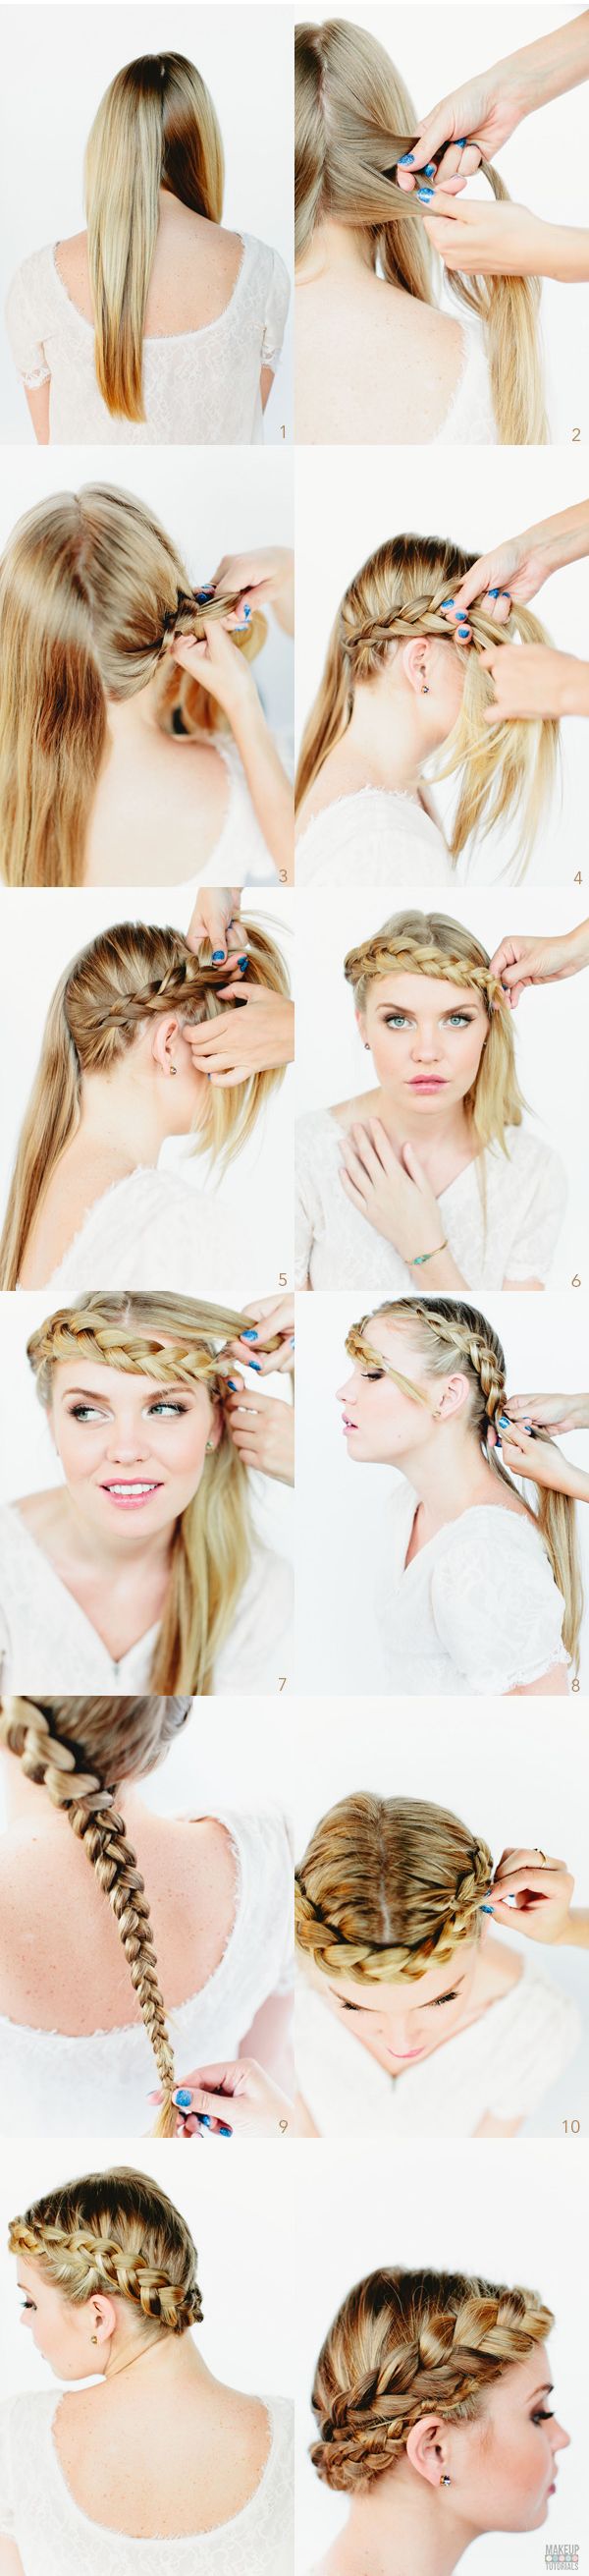 Crown Braid - 21 Lovely French Braid Tutorials For Every Woman | Step By Step Ha...